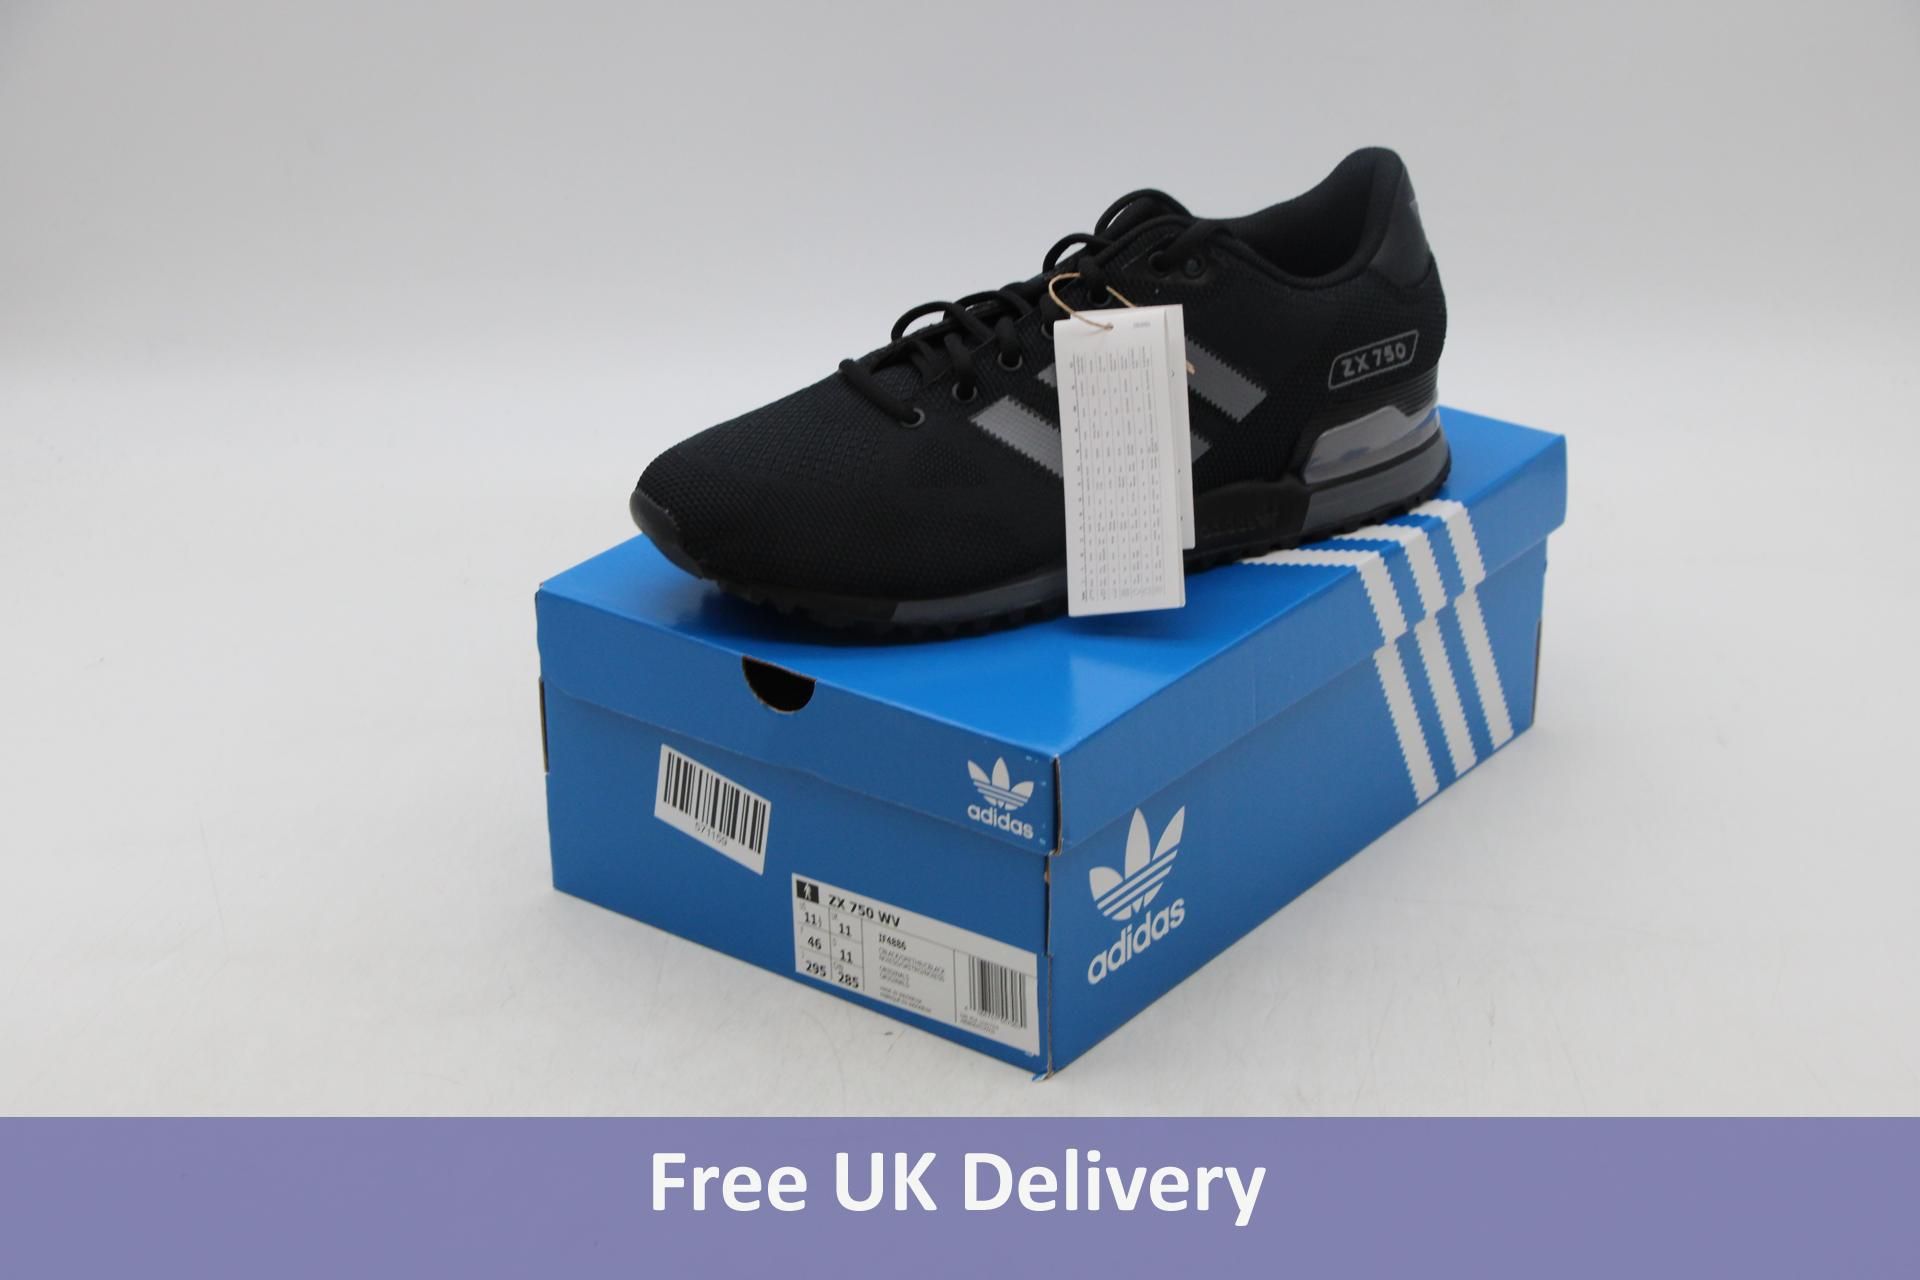 Adidas ZX 750 WV Trainers, Black, UK 11